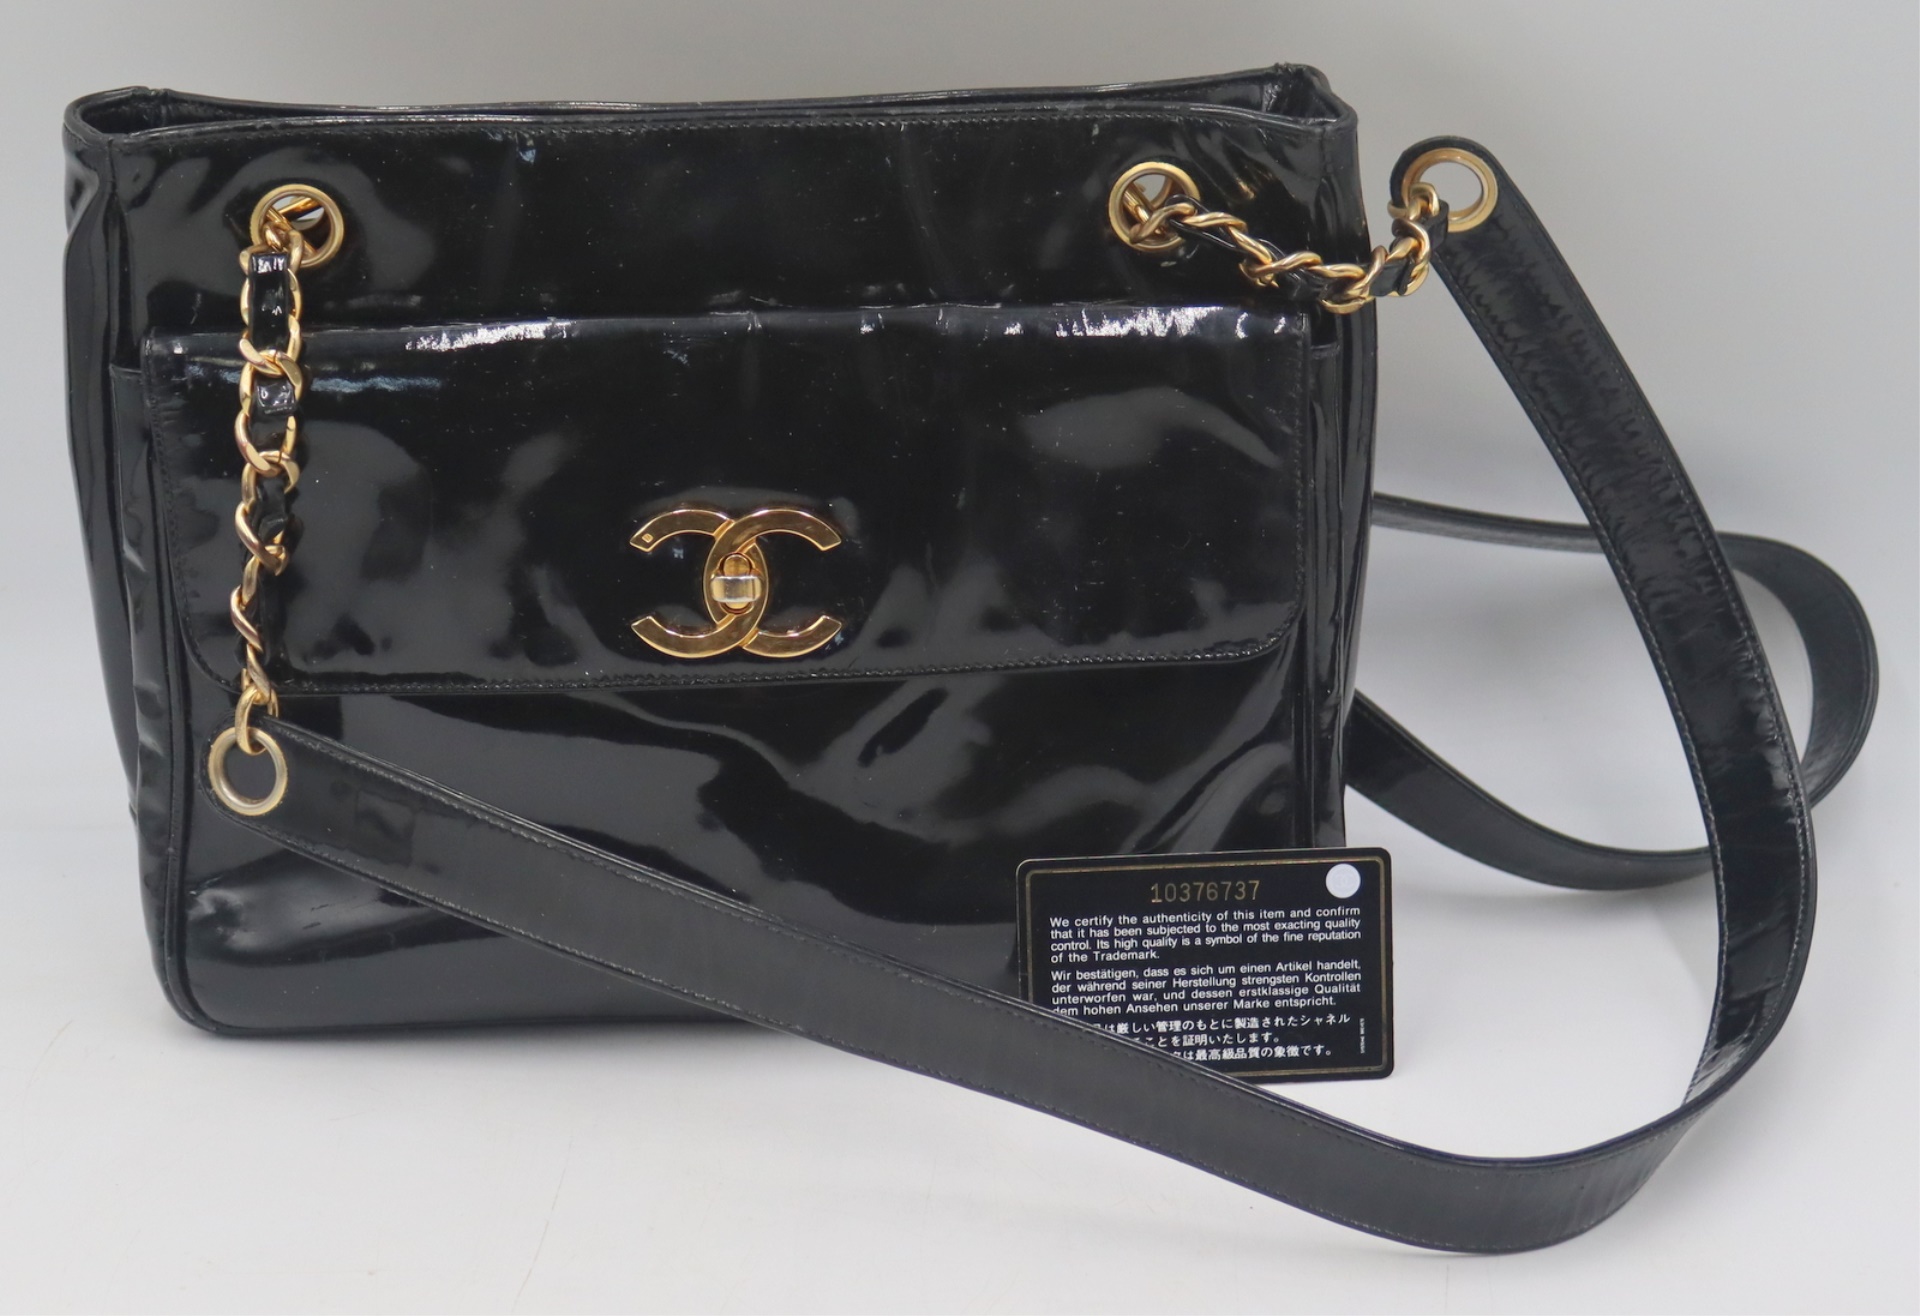 COUTURE CHANEL PATENT LEATHER 3bb06a